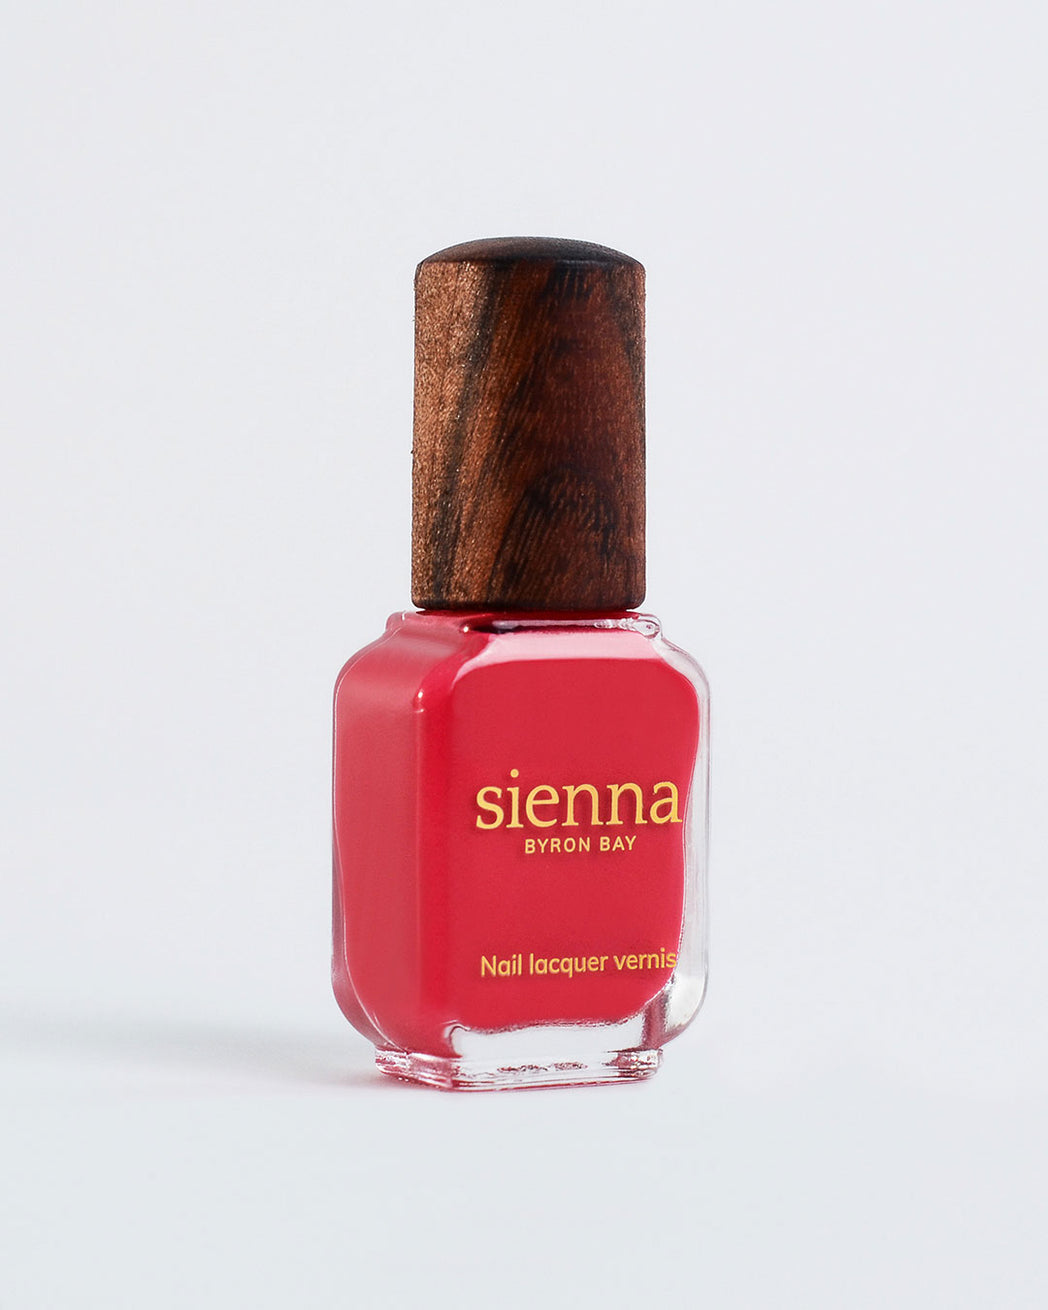 Bright Topaz Pink nail polish bottle with timber cap by Sienna Byron Bay